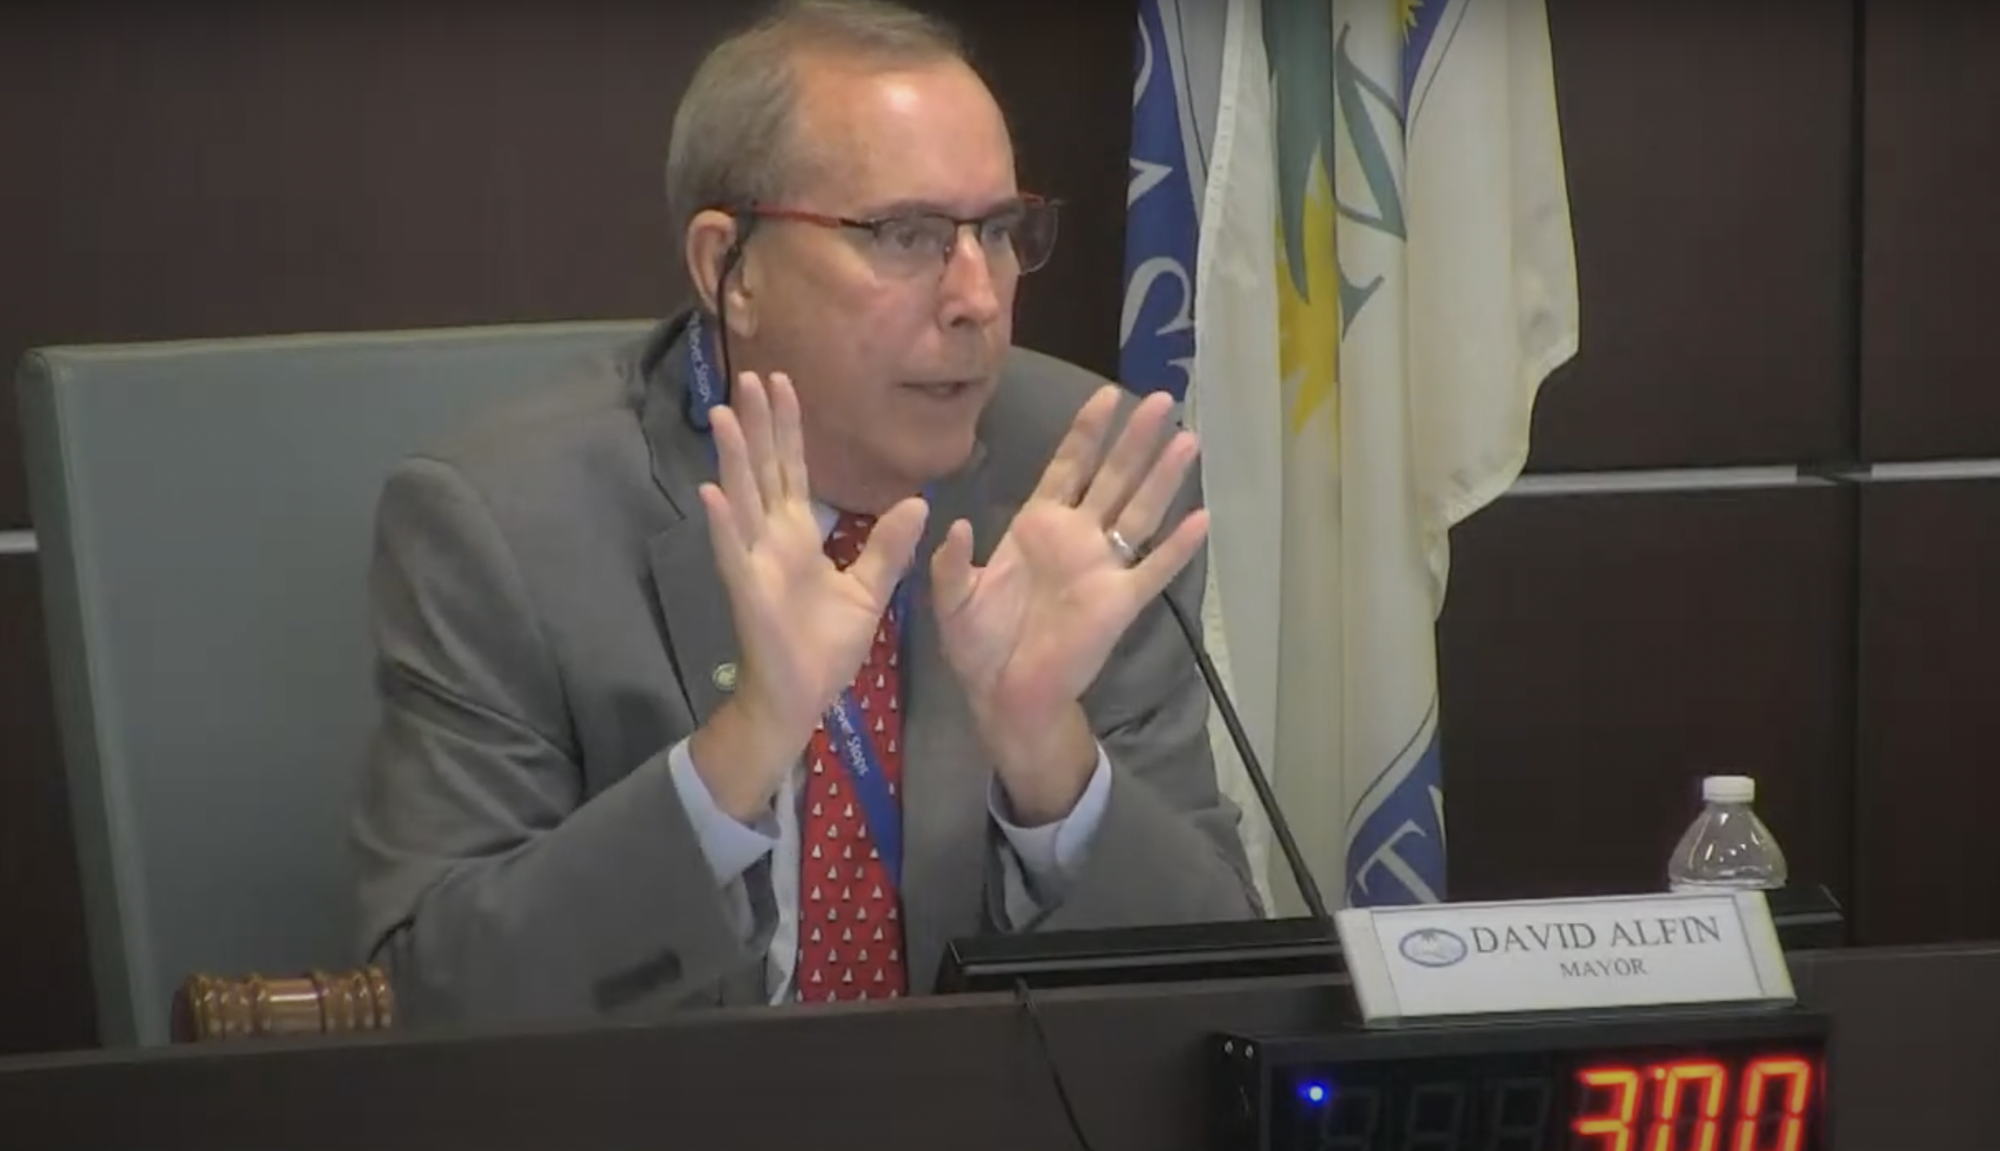 Palm Coast Mayor David Alfin speaks at a Sept. 8 City Council millage hearing. Image from city meeting livestream